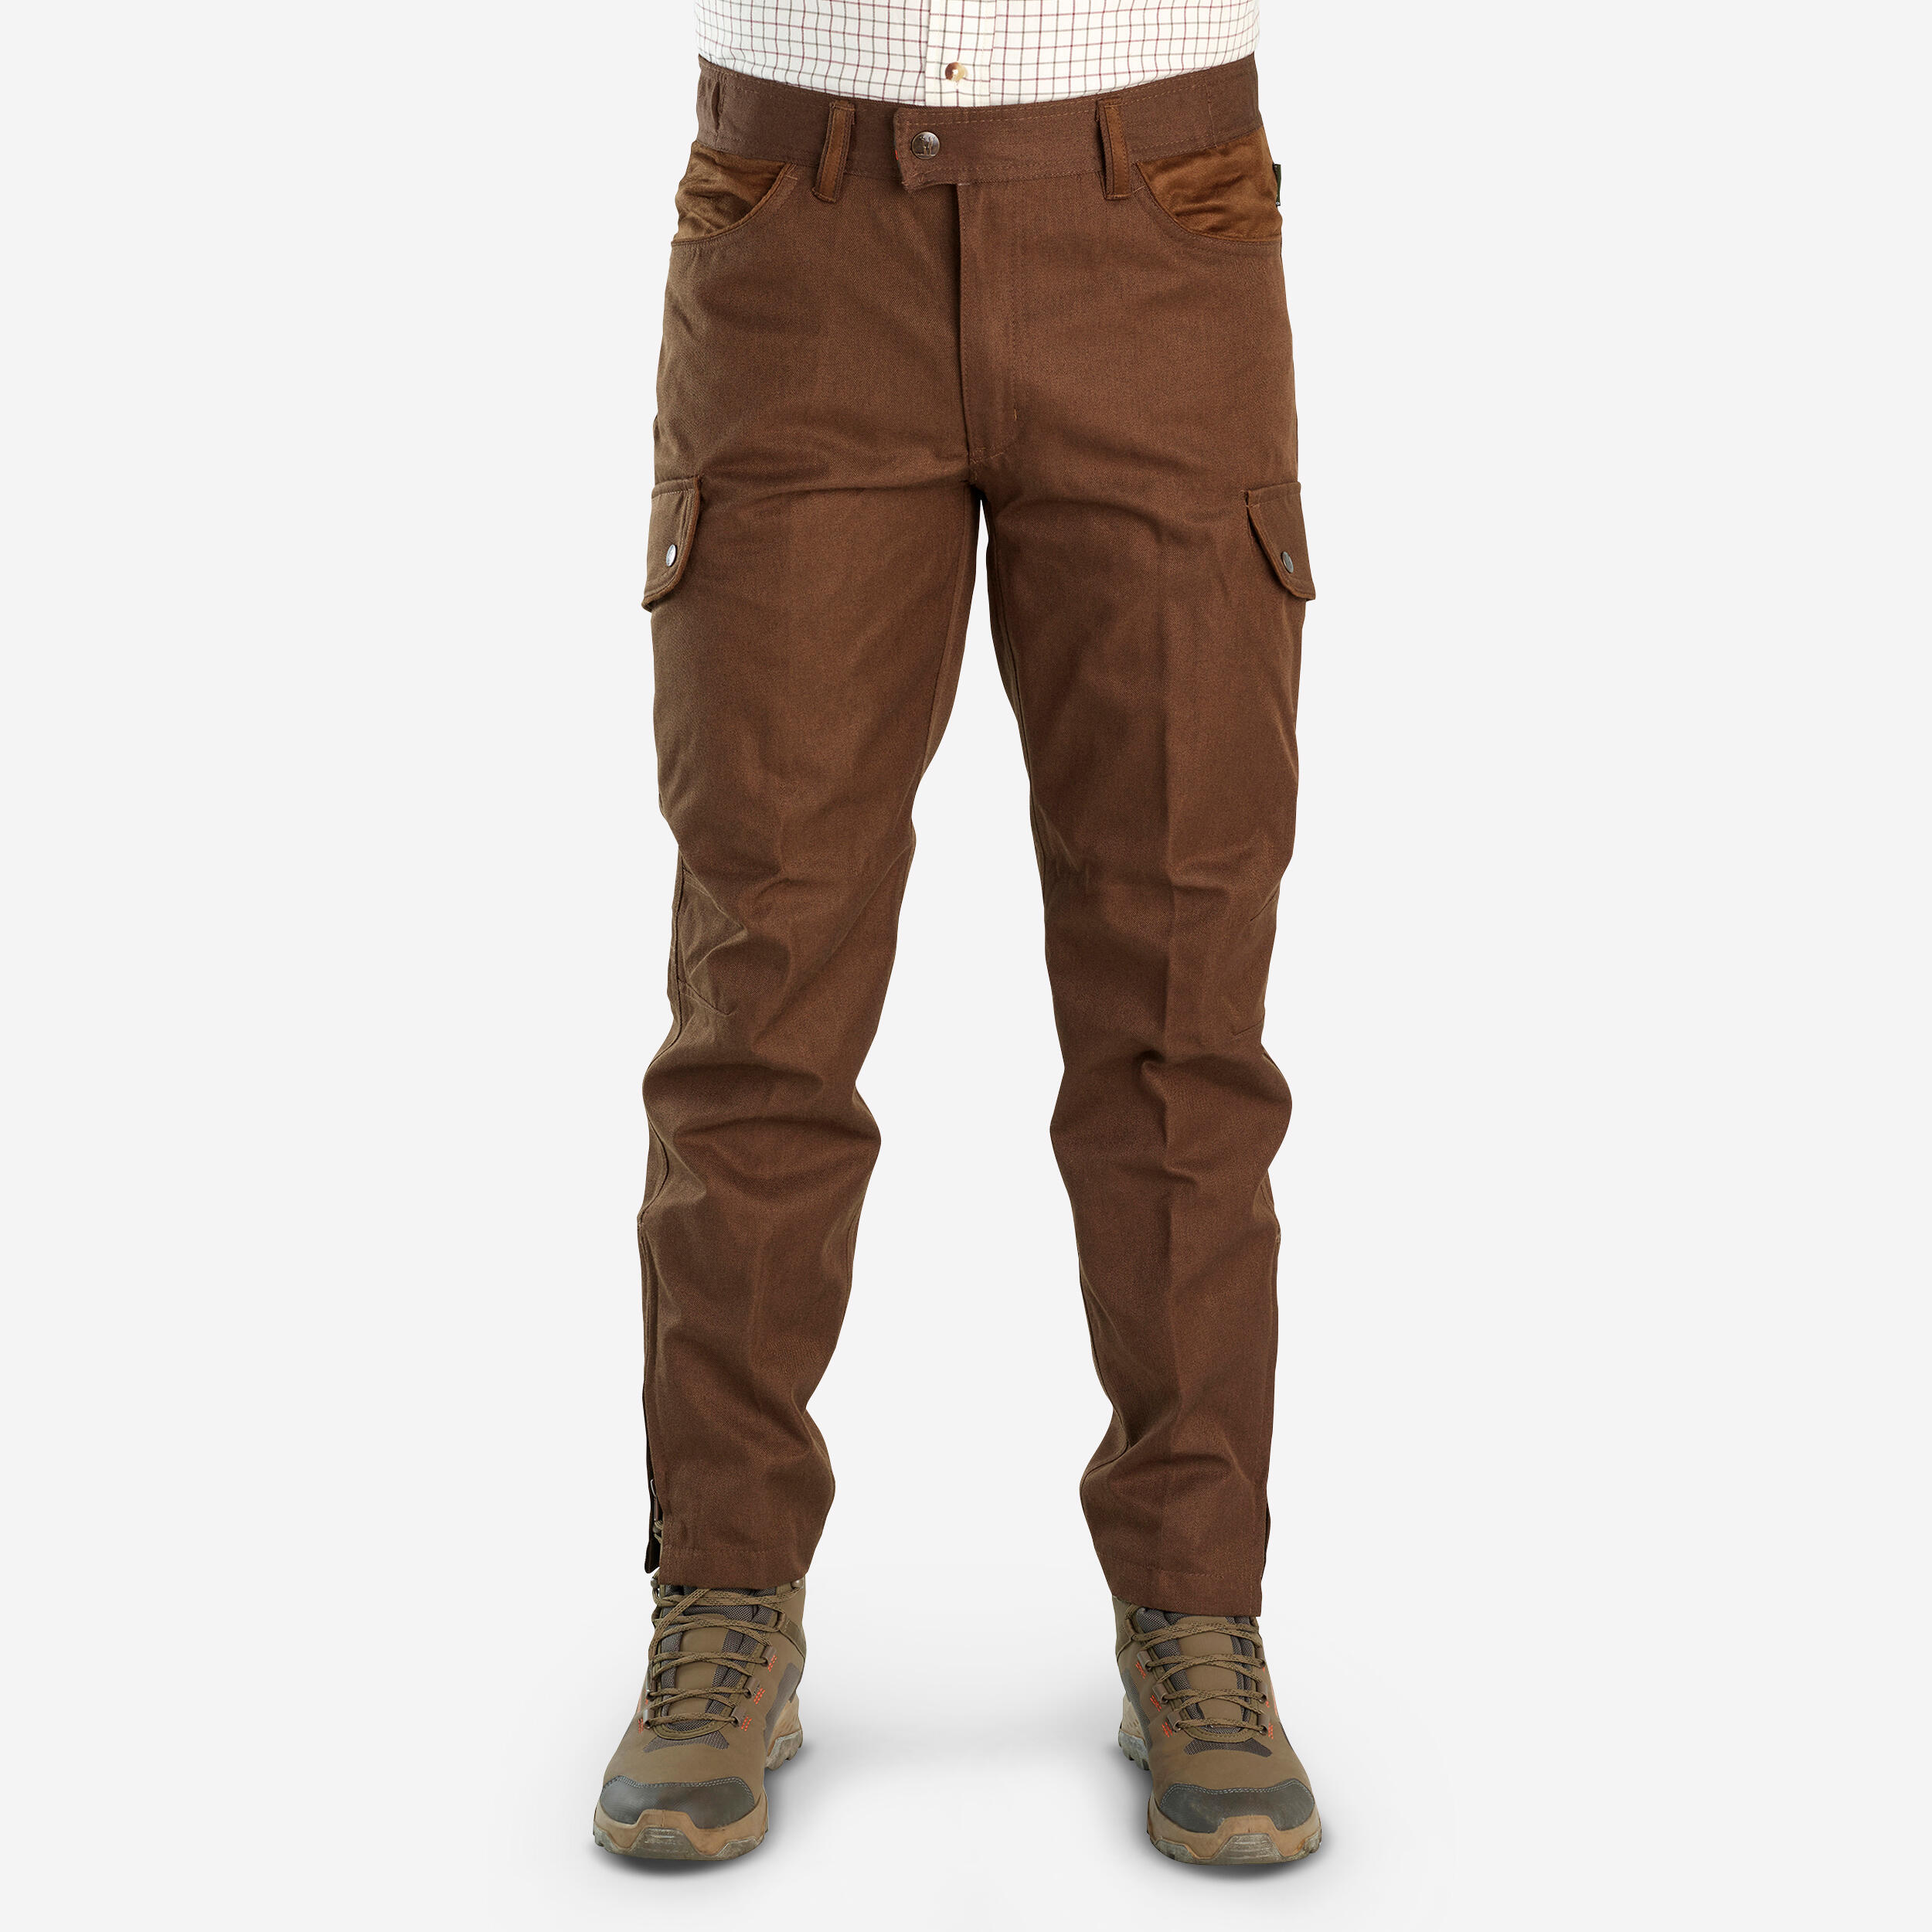 Men's Country Sport Resistant Breathable Trousers - Steppe 920 Brown  Gaiters SOLOGNAC | Decathlon